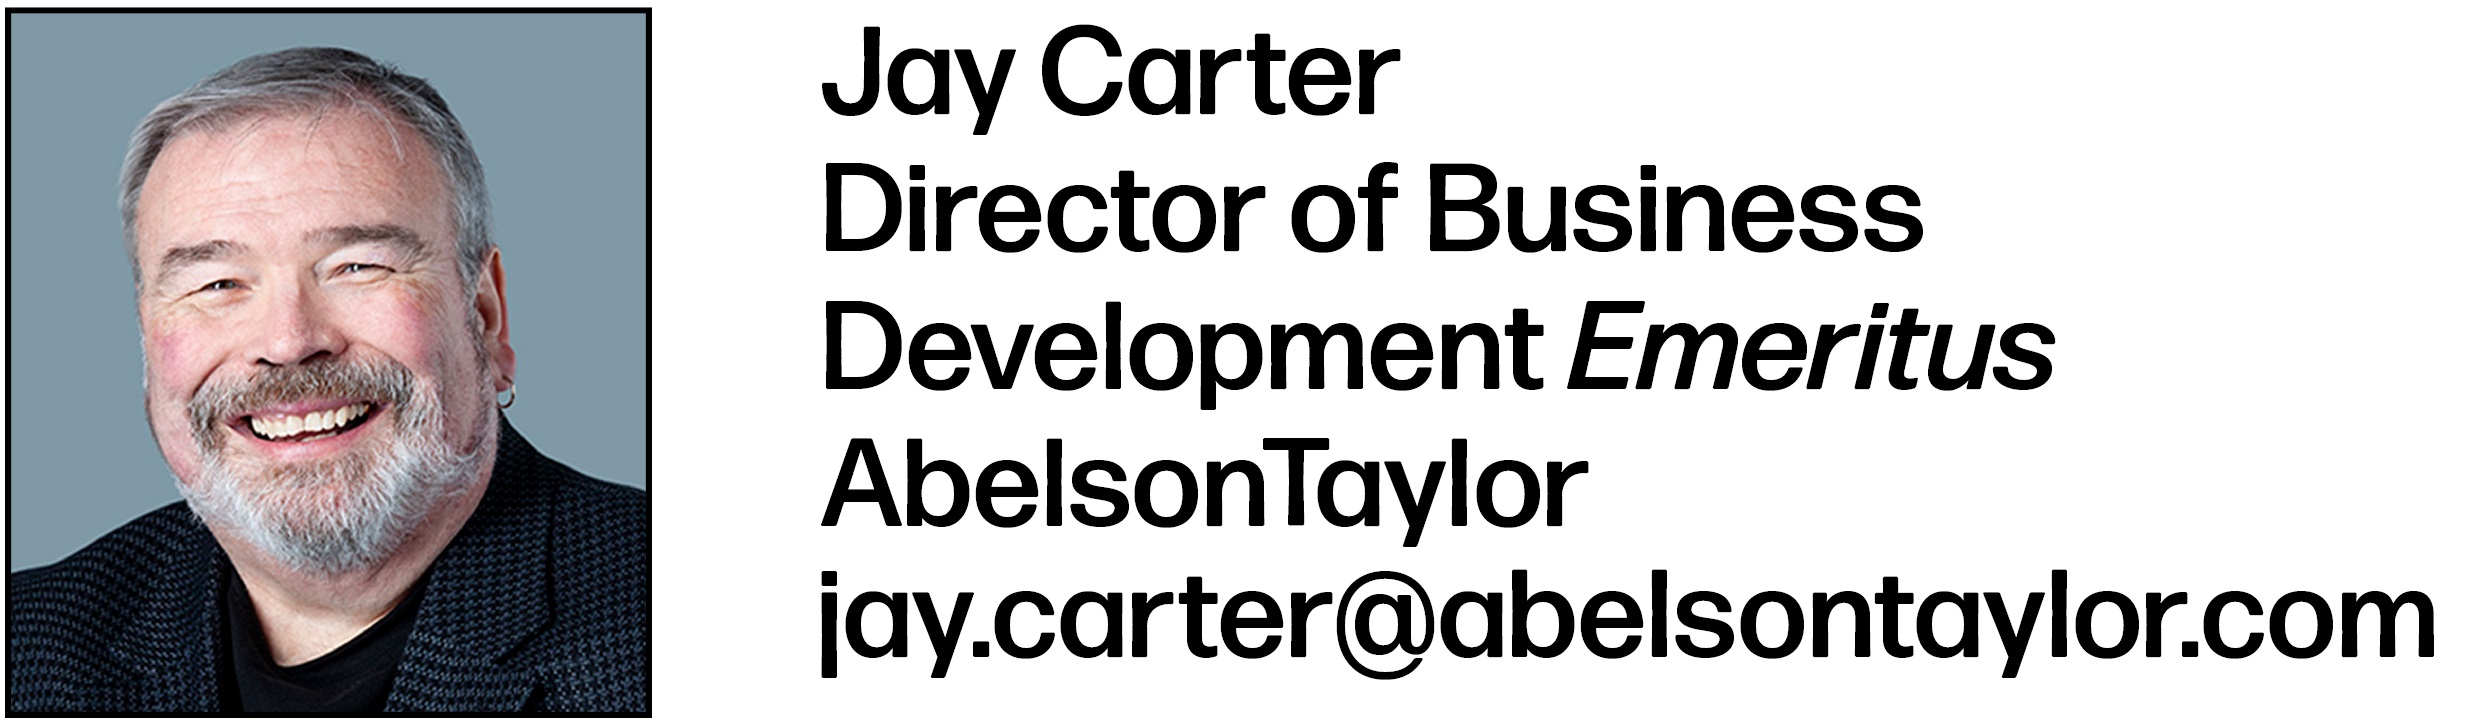 Jay Carter is Director of Business Development Emeritus at AbelsonTaylor. His email is jay.carter@abelsontaylor.com.